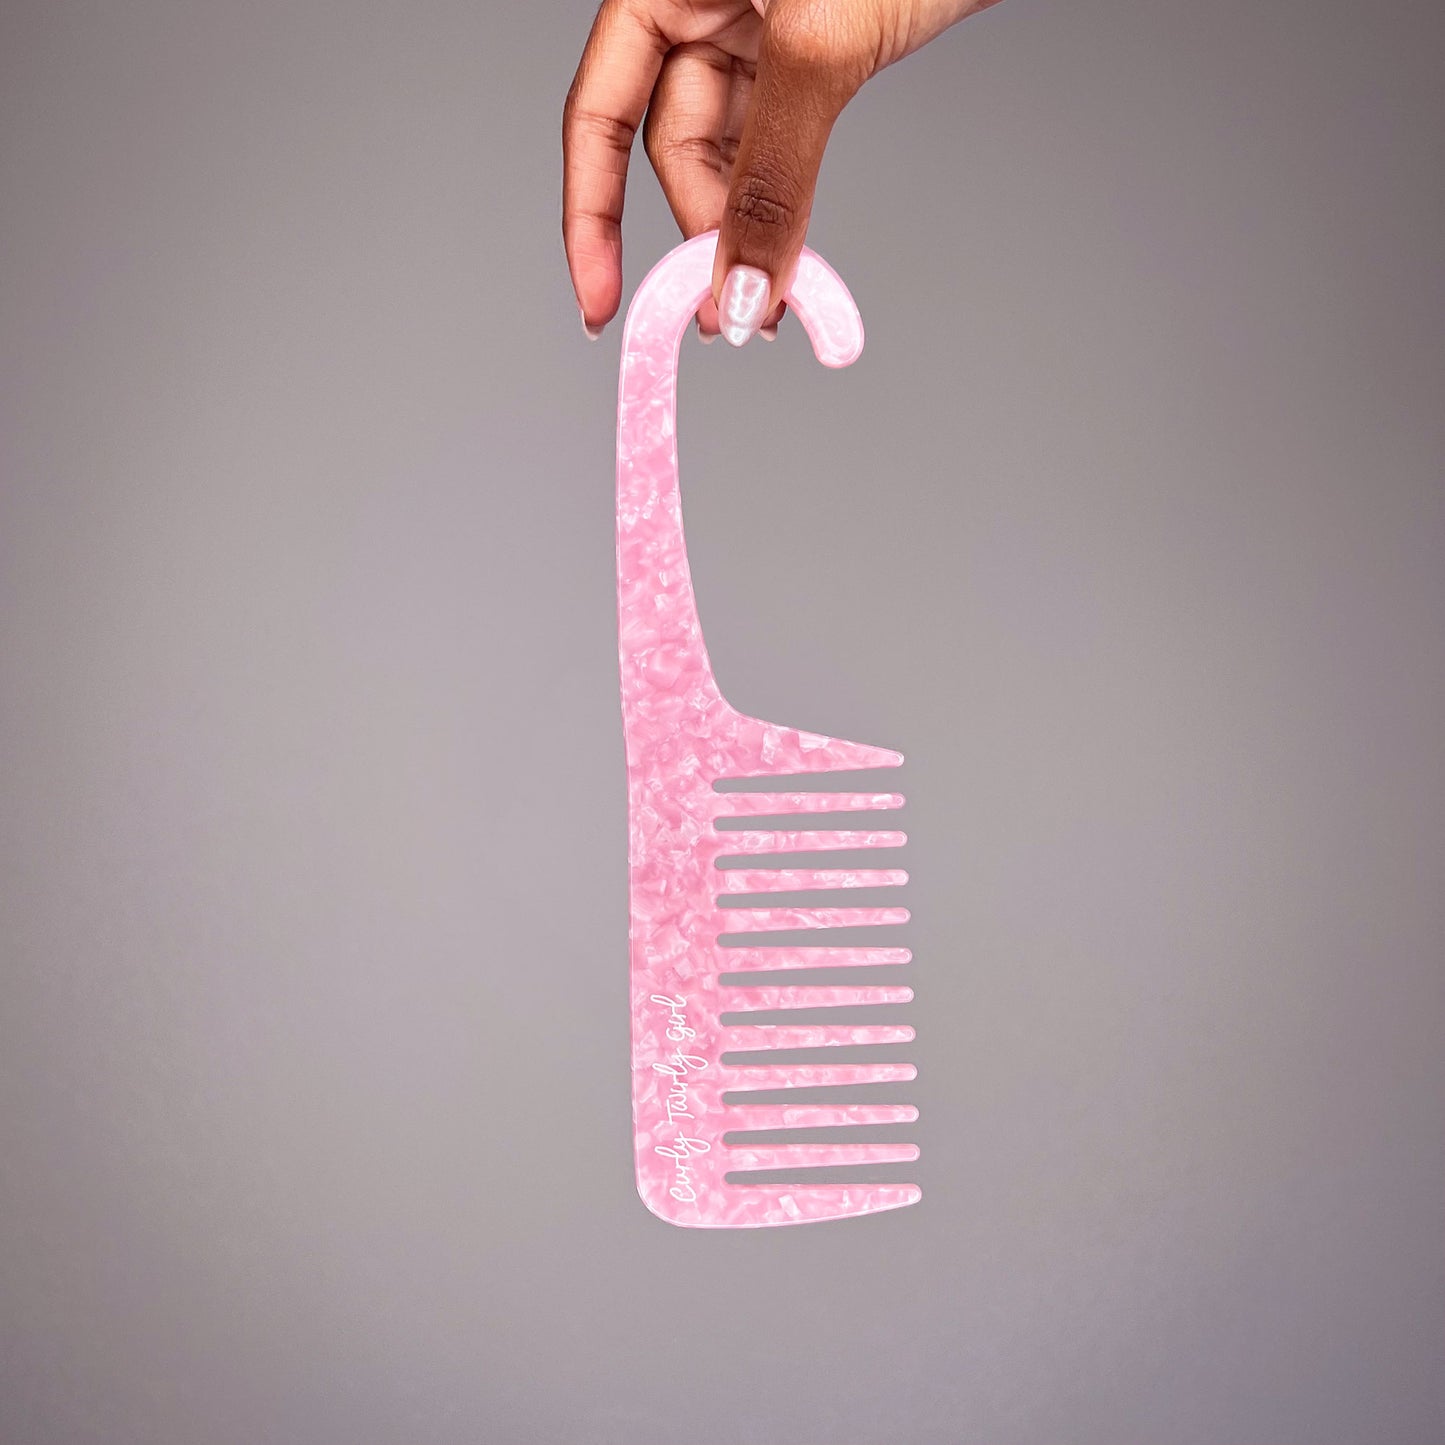 Hand holding pink wide tooth shower comb with hook